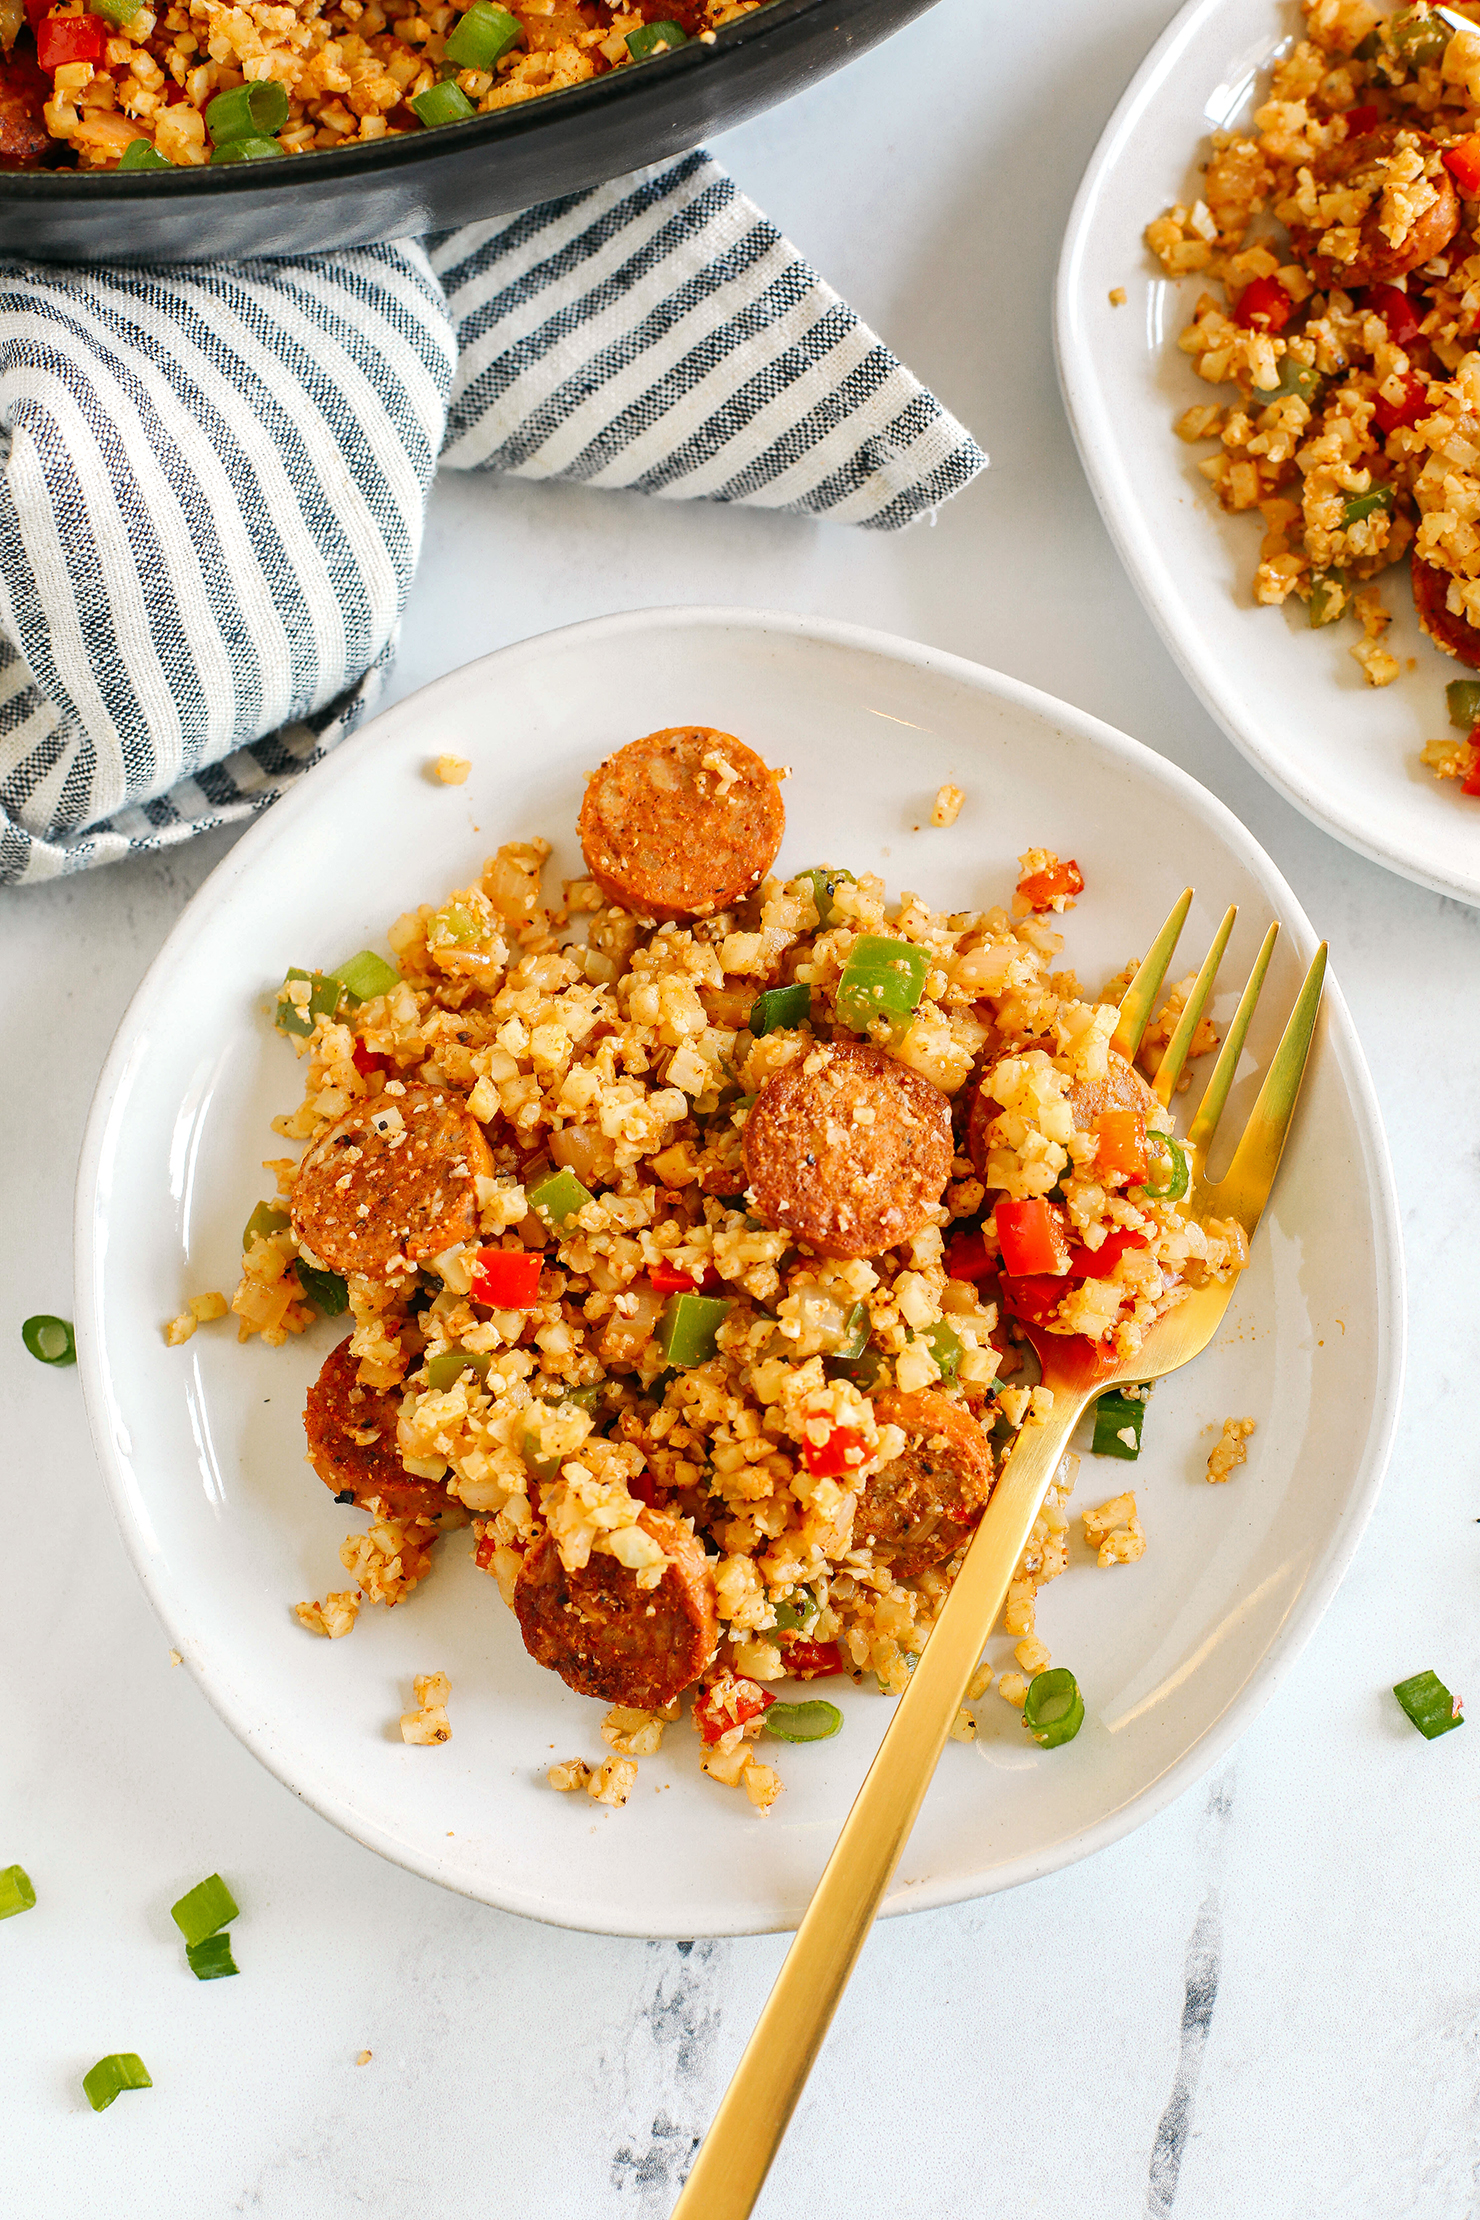 This Cajun Sausage and Cauliflower Rice Skillet is loaded with peppers, onions, andouille chicken sausage and tender riced cauliflower seasoned to perfection with our homemade Cajun seasoning!  The perfect low carb dinner for your family!